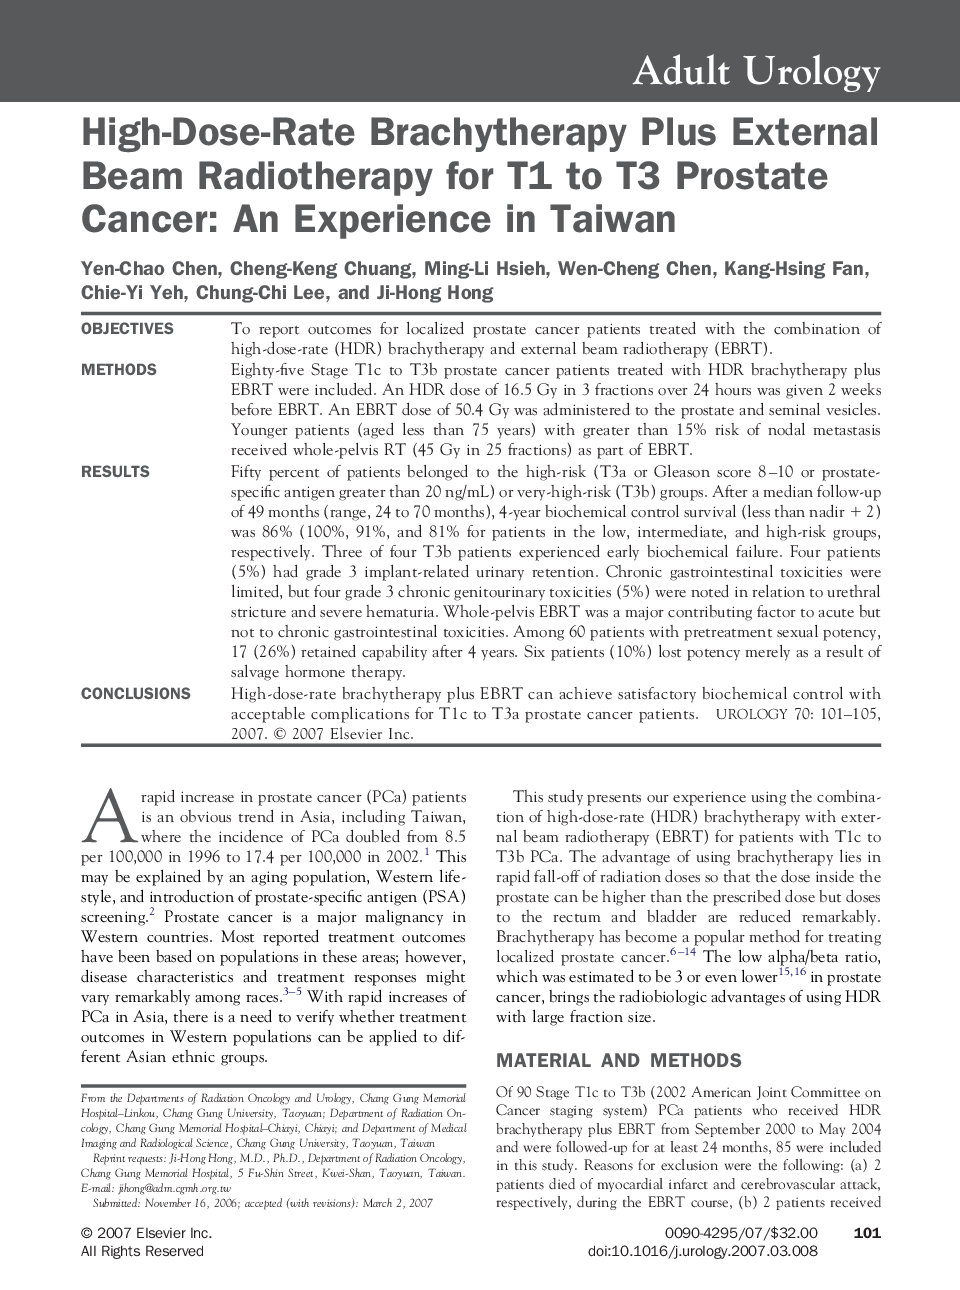 High-Dose-Rate Brachytherapy Plus External Beam Radiotherapy for T1 to T3 Prostate Cancer: An Experience in Taiwan